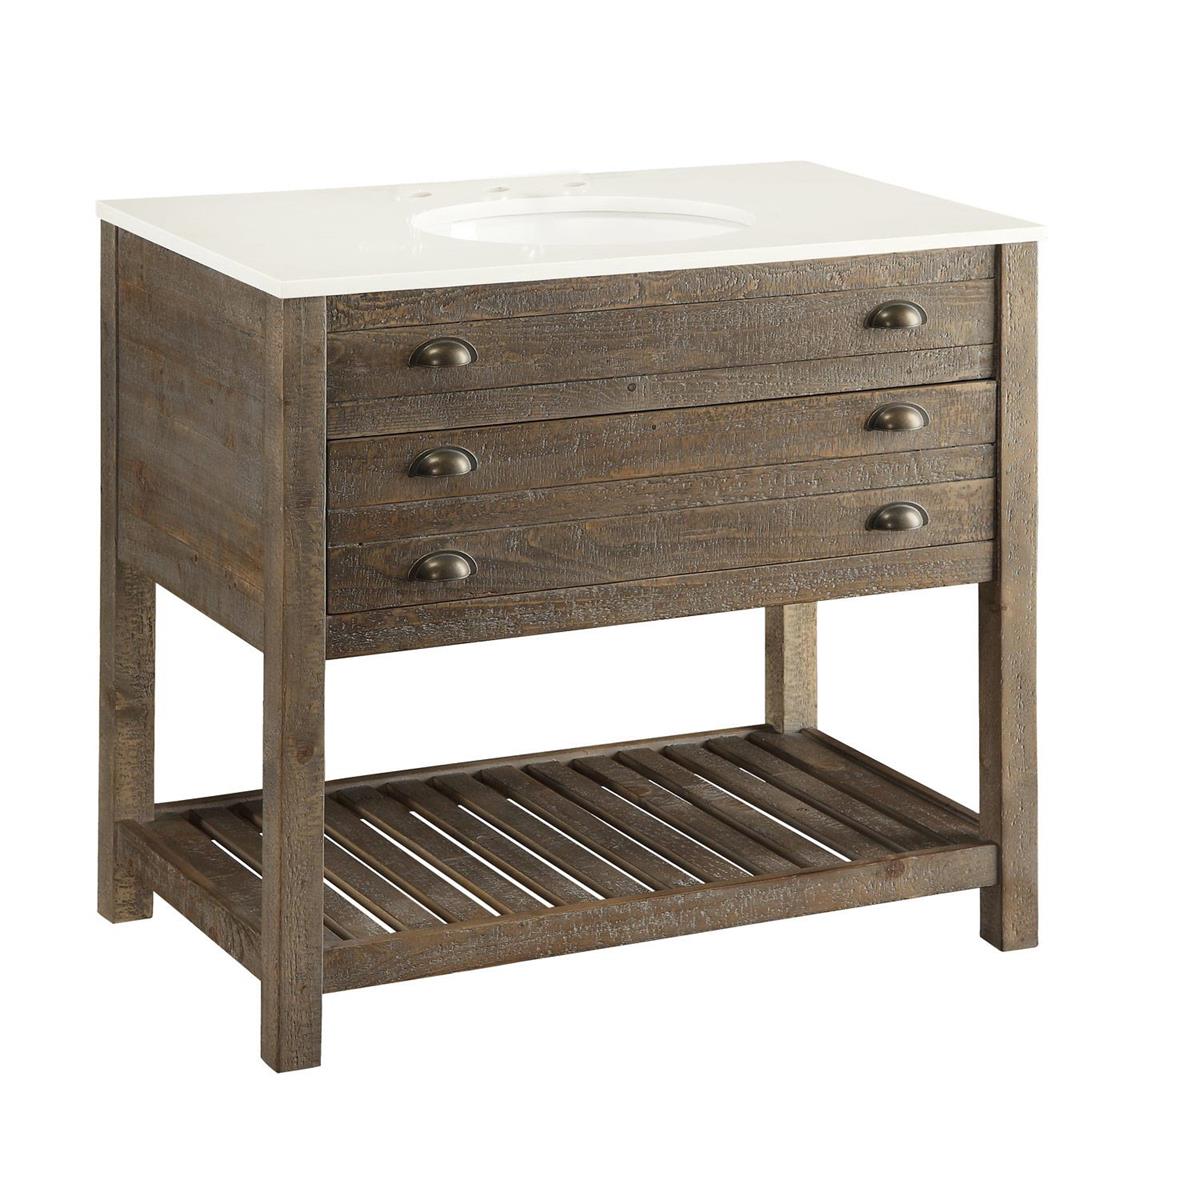 "Cream Colored Speckled Cultured Marble Topped One Drawer Vanity Sink"-Coast2Coast Home-C2CA-78626-Bathroom Vanity-1-France and Son